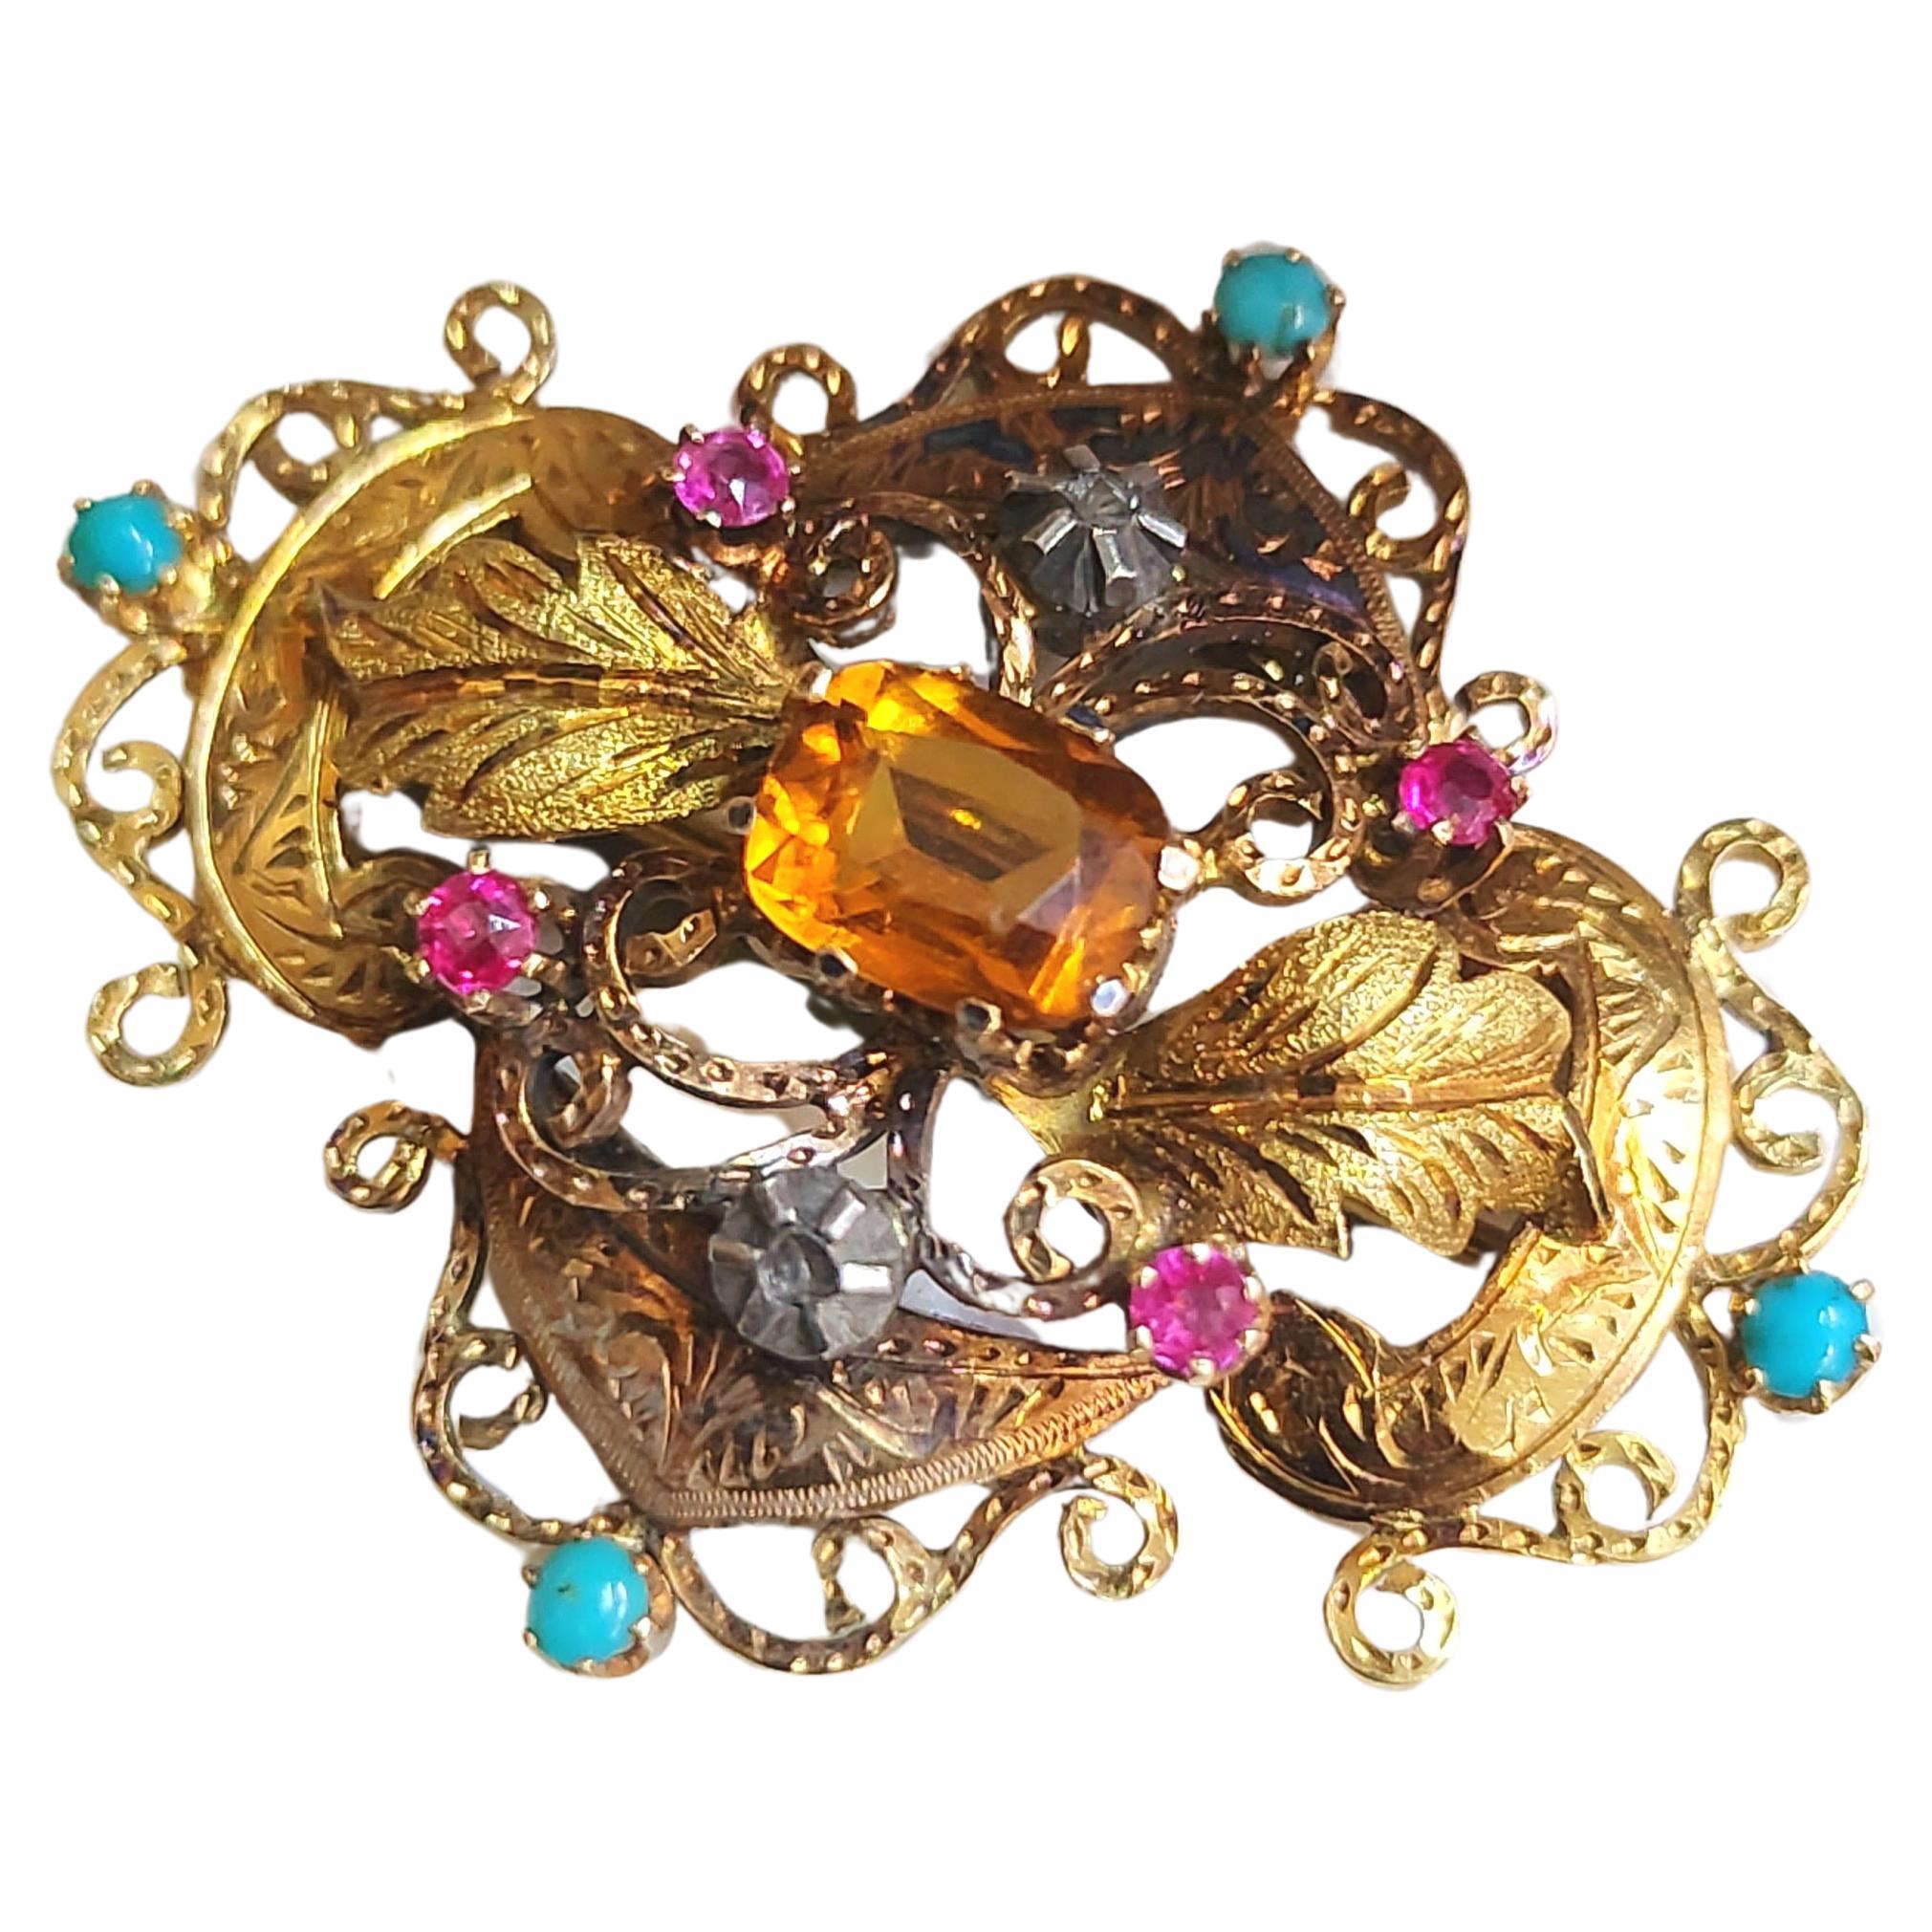 Antique victorian era 18k gold brooch with natural colorful gem stones centered with cetrine stone flanked with rubies and terqouise and rose cut diamond in detailed workmanship dates back to 1880s